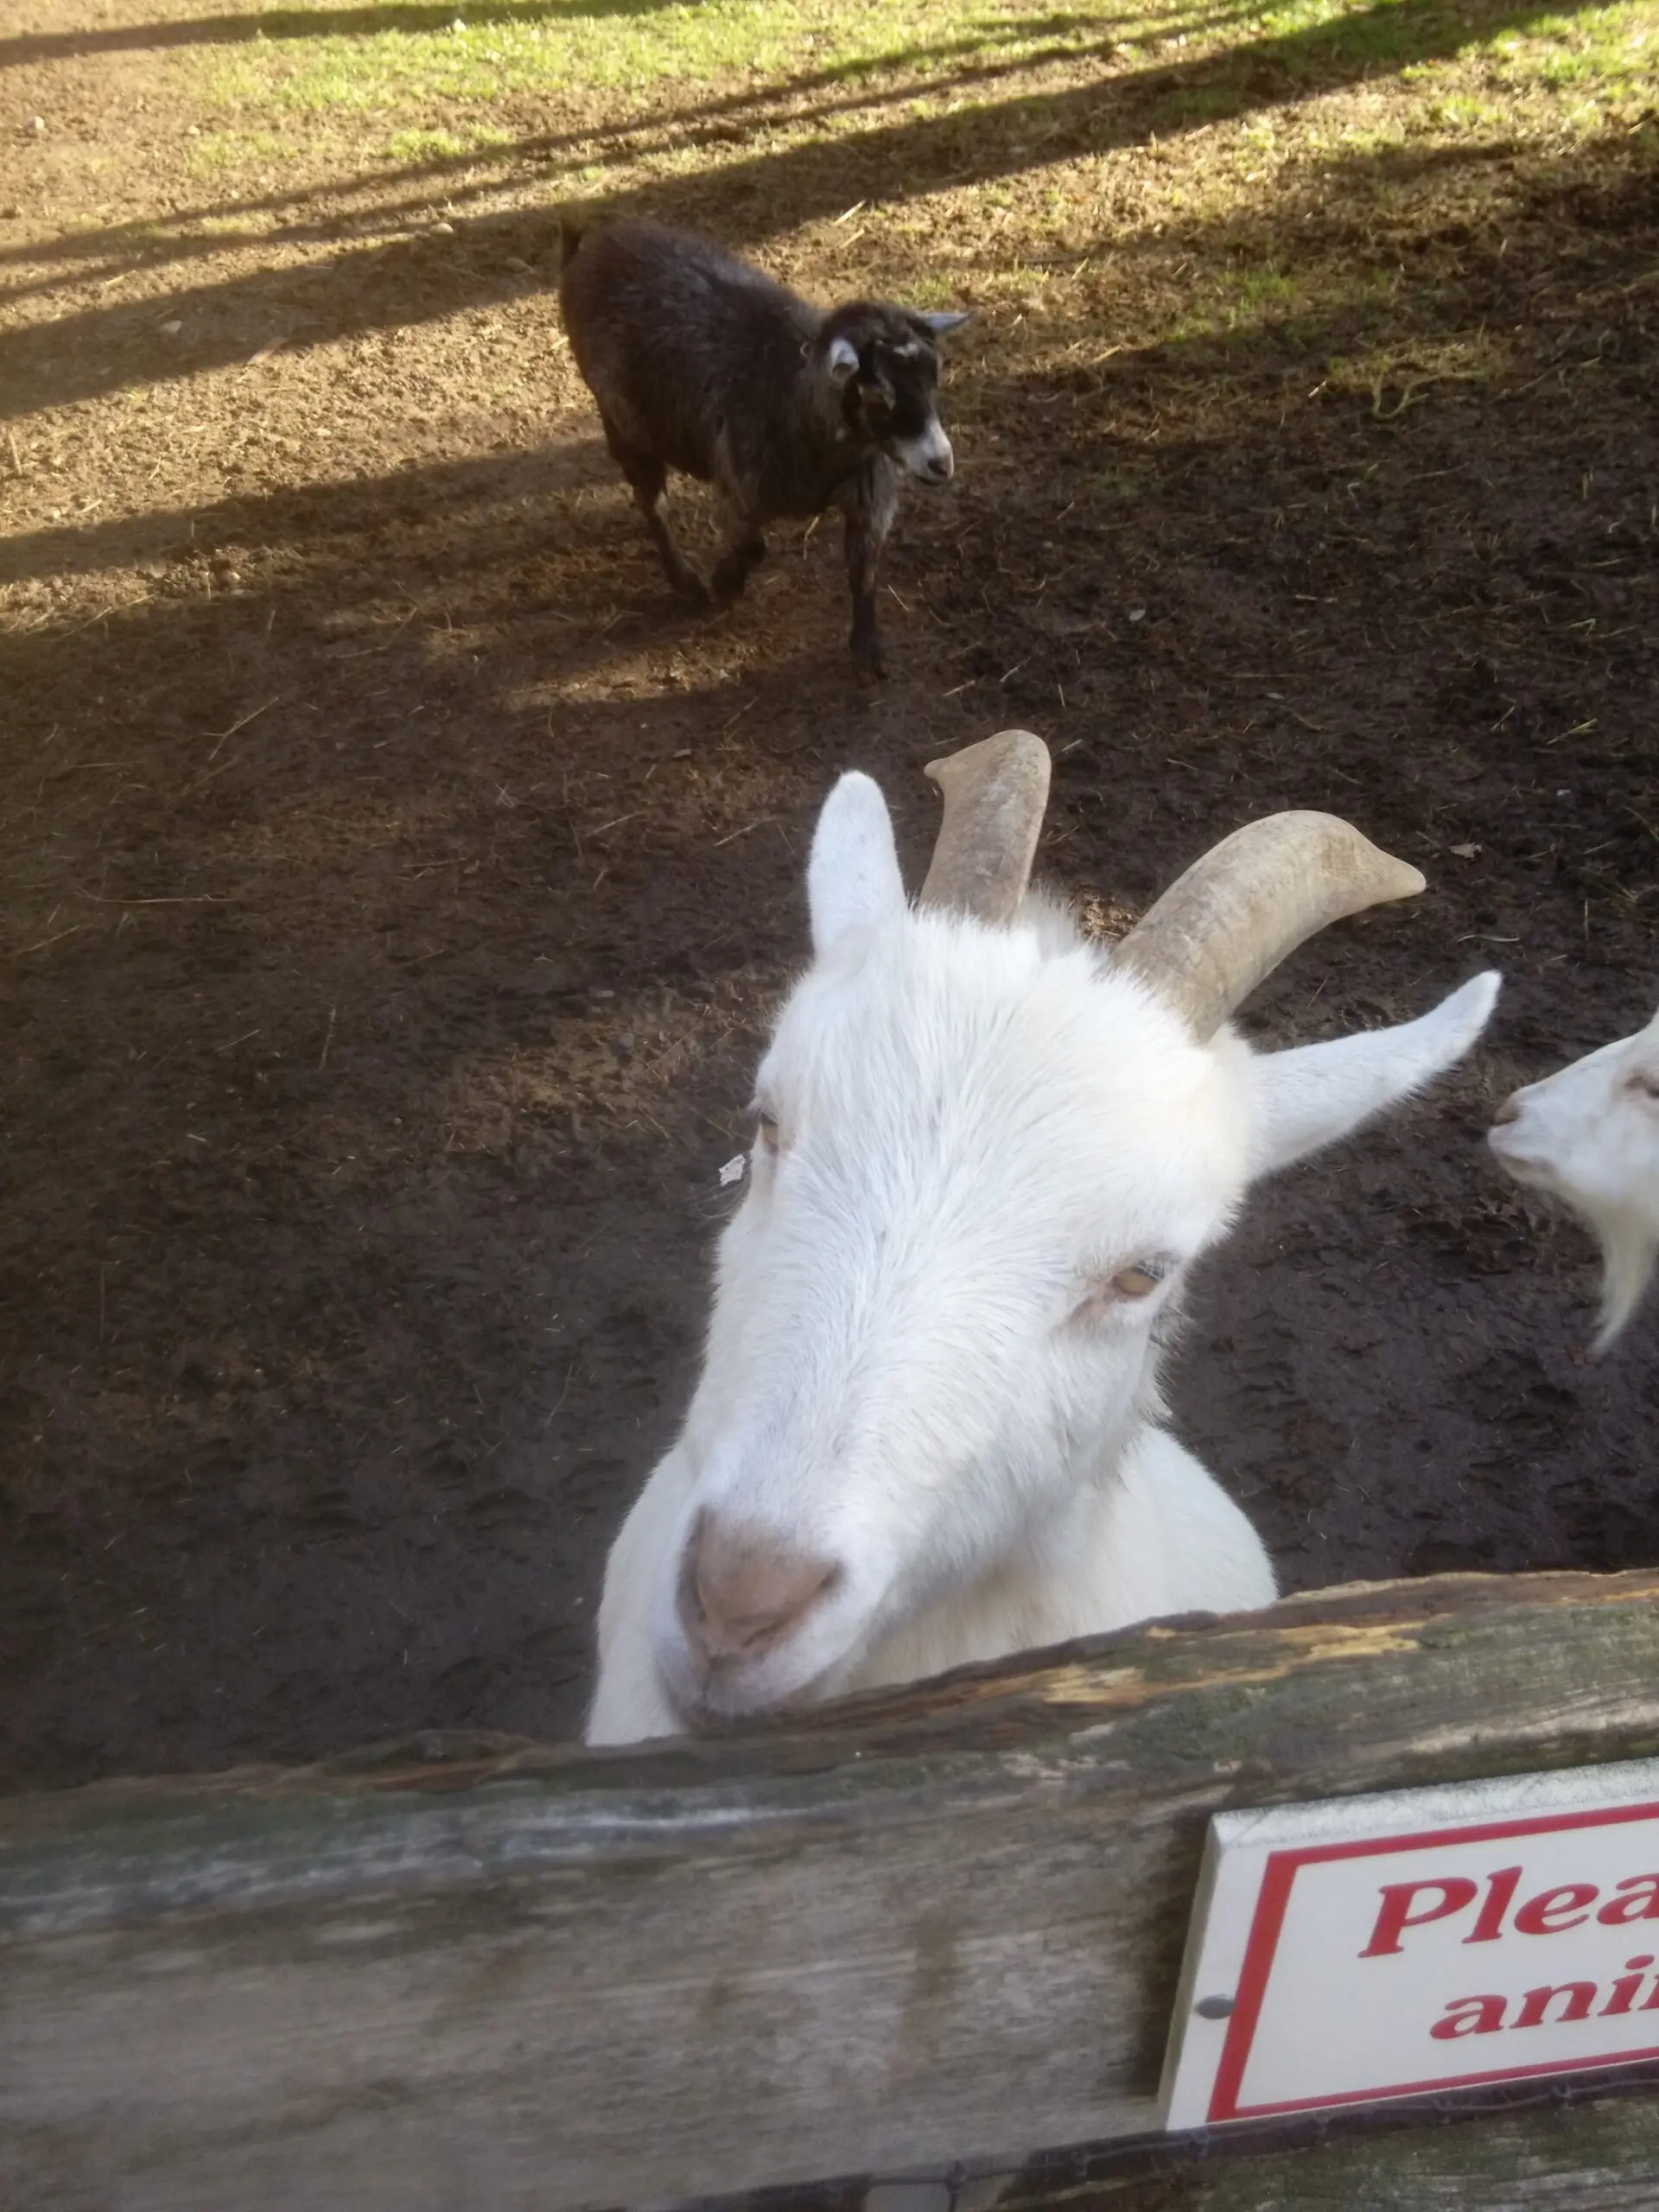 A friendly (hungry) goat